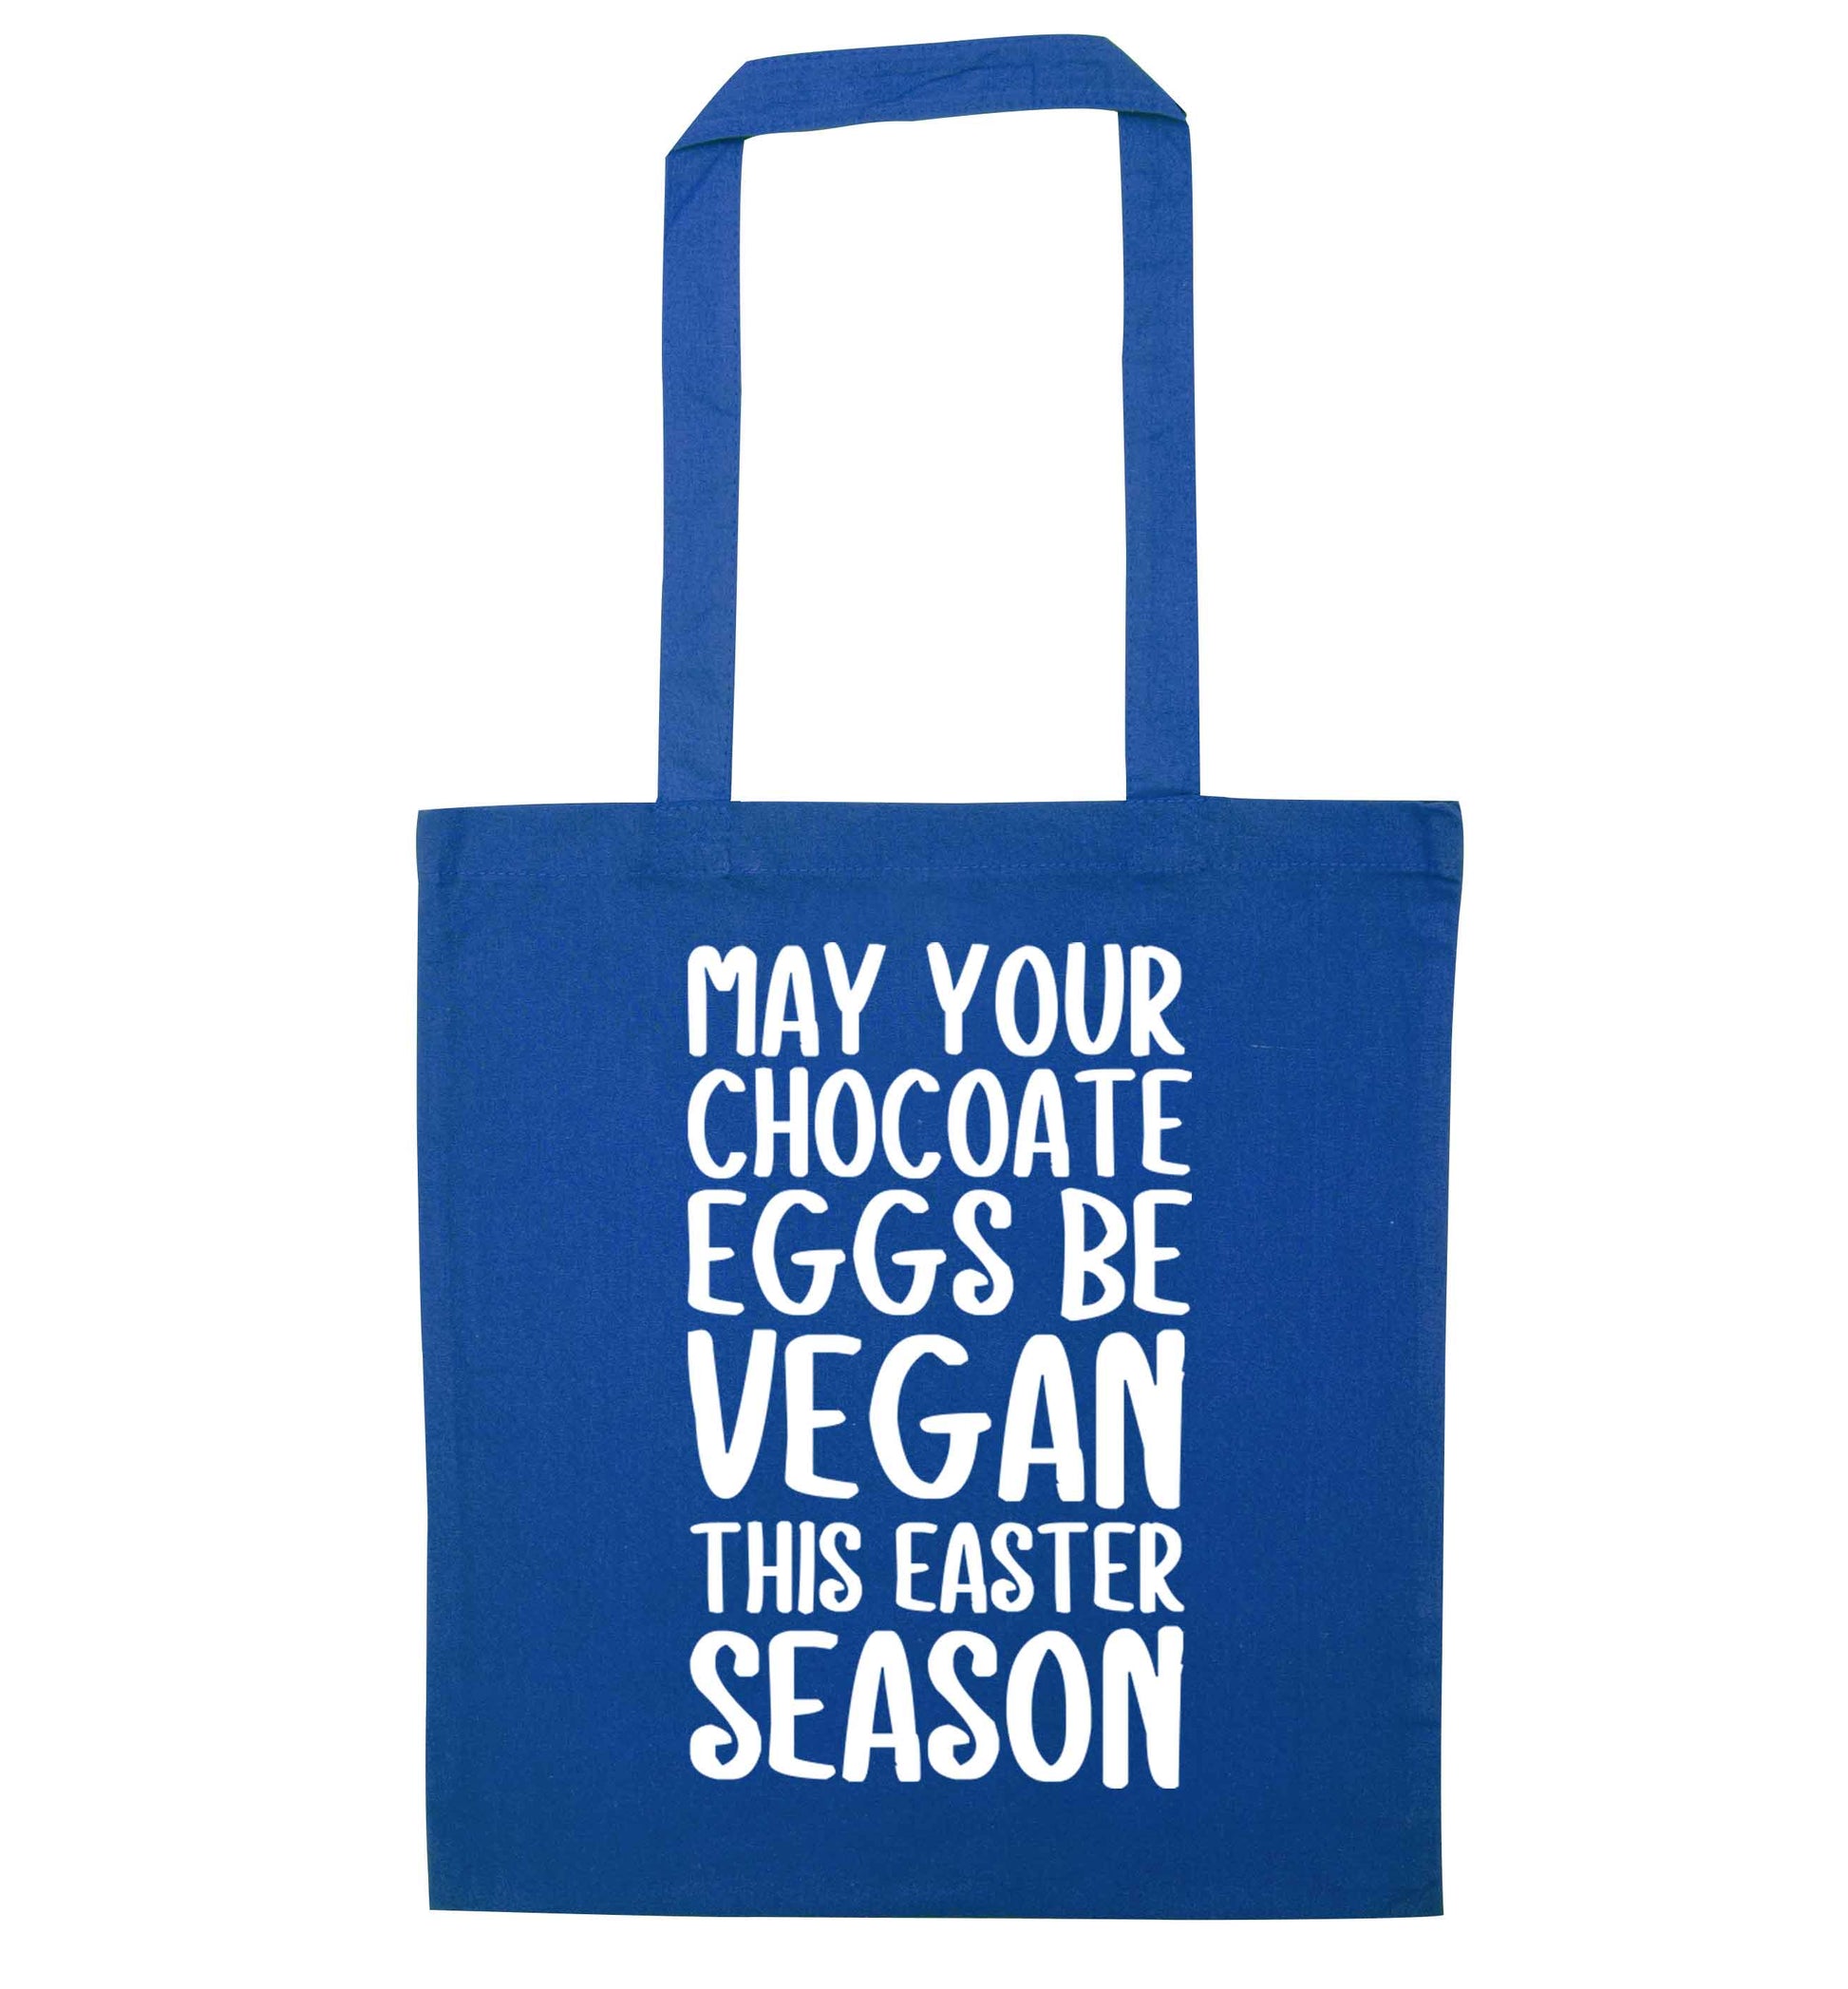 Easter bunny approved! Vegans will love this easter themed blue tote bag